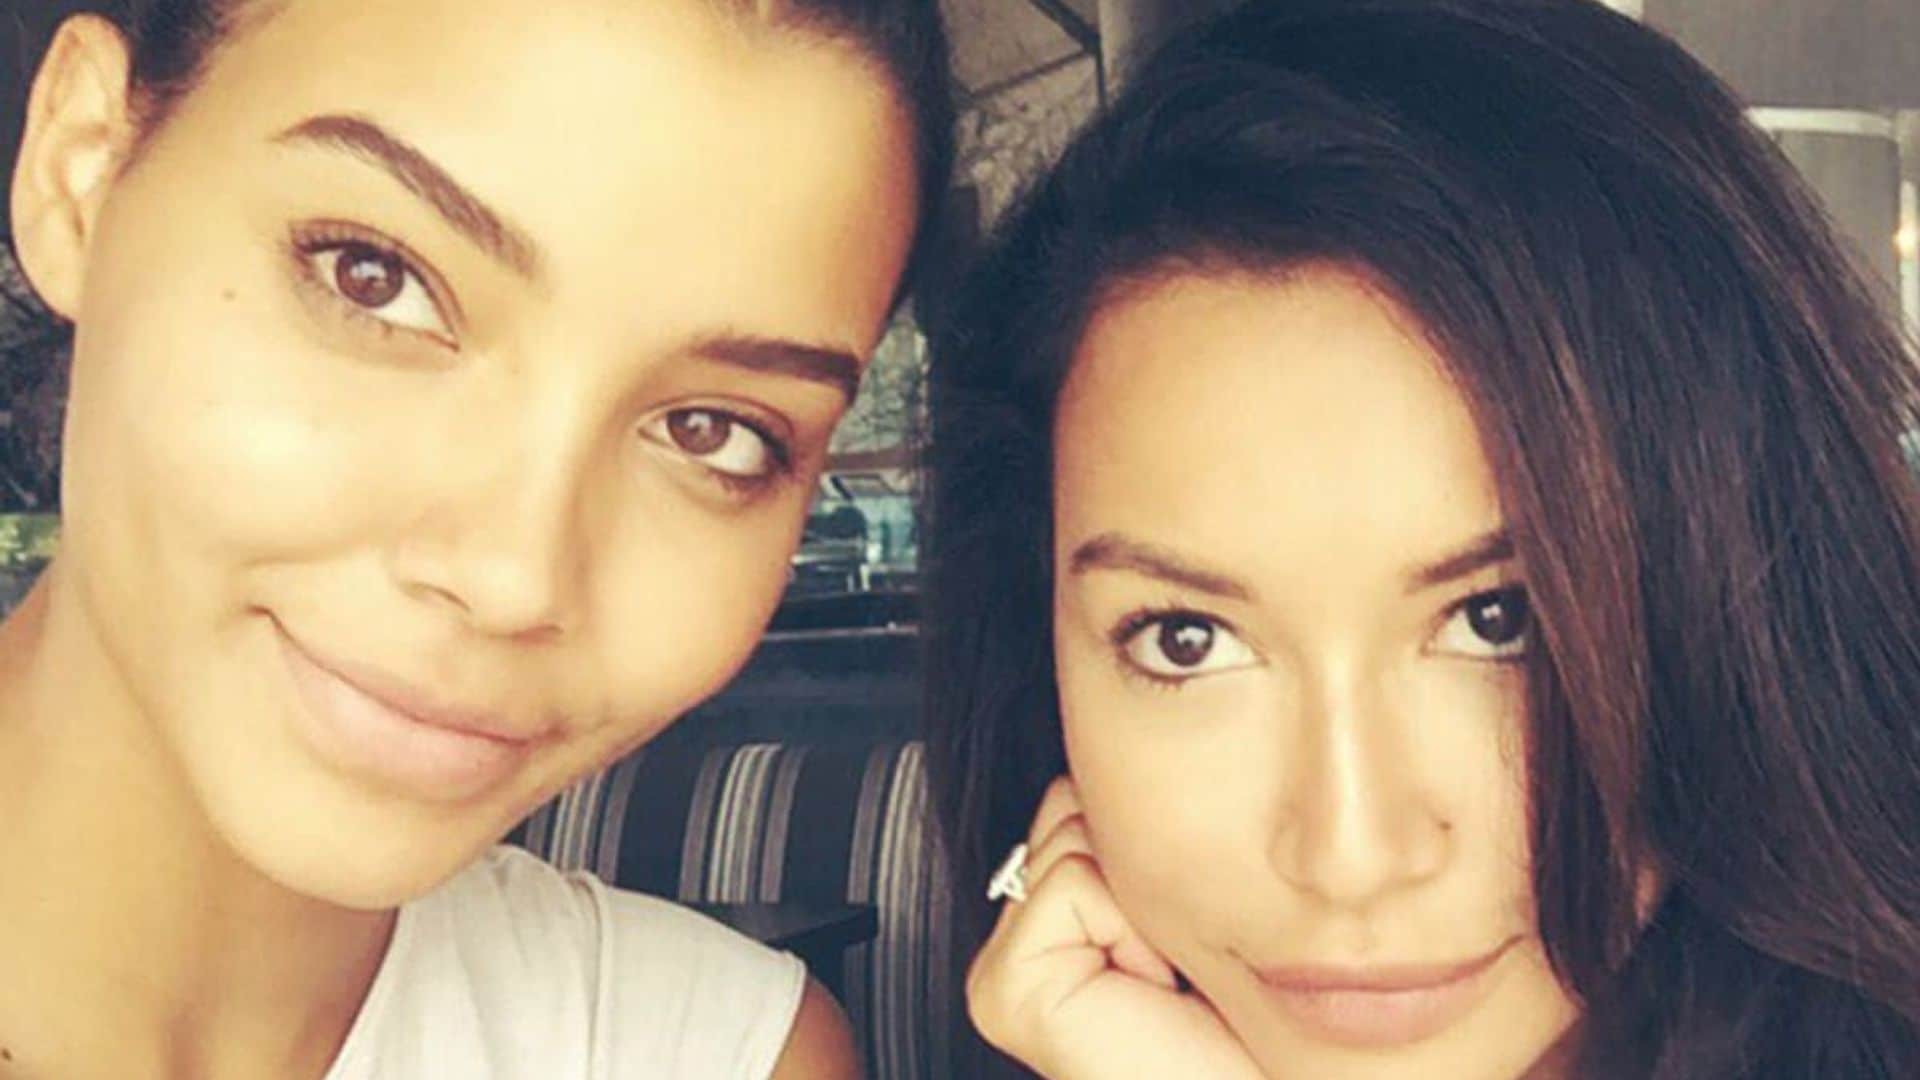 Naya Rivera’s sister Nickayla opens up about her recovery process following the ‘Glee’ star’s death